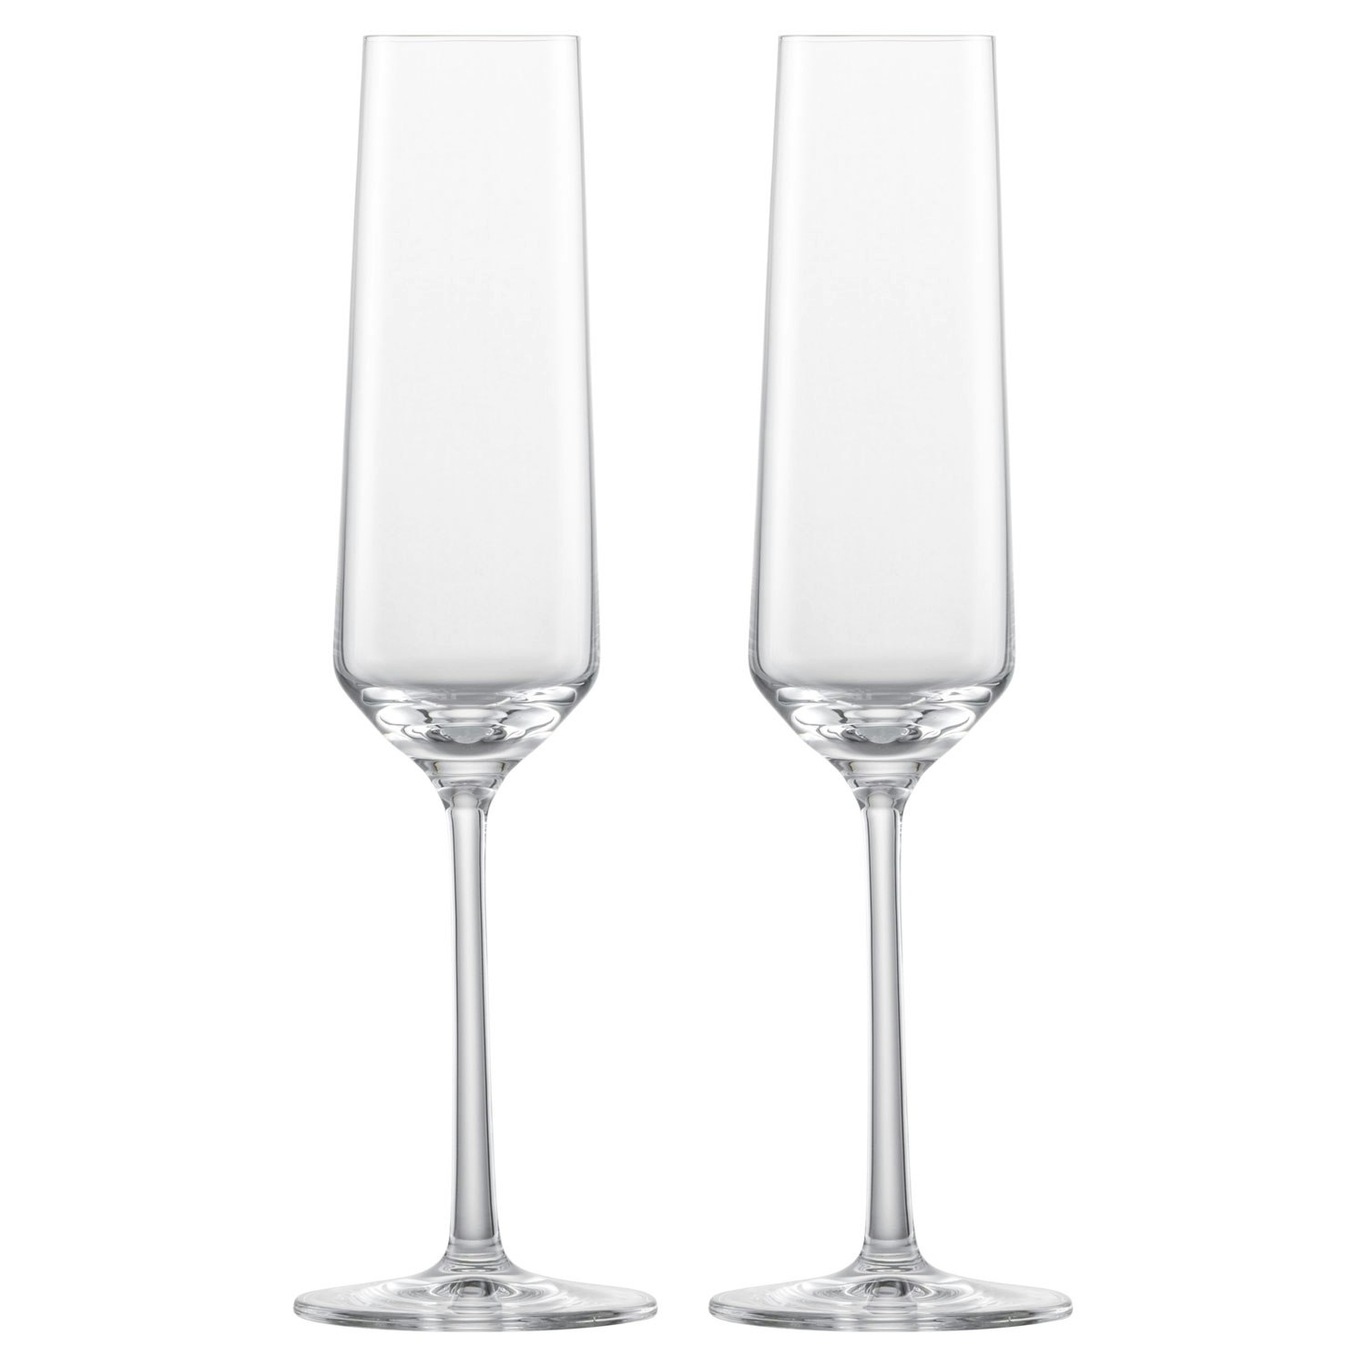 https://royaldesign.com/image/2/zwiesel-pure-champagne-glass-21-cl-2-pack-0?w=800&quality=80